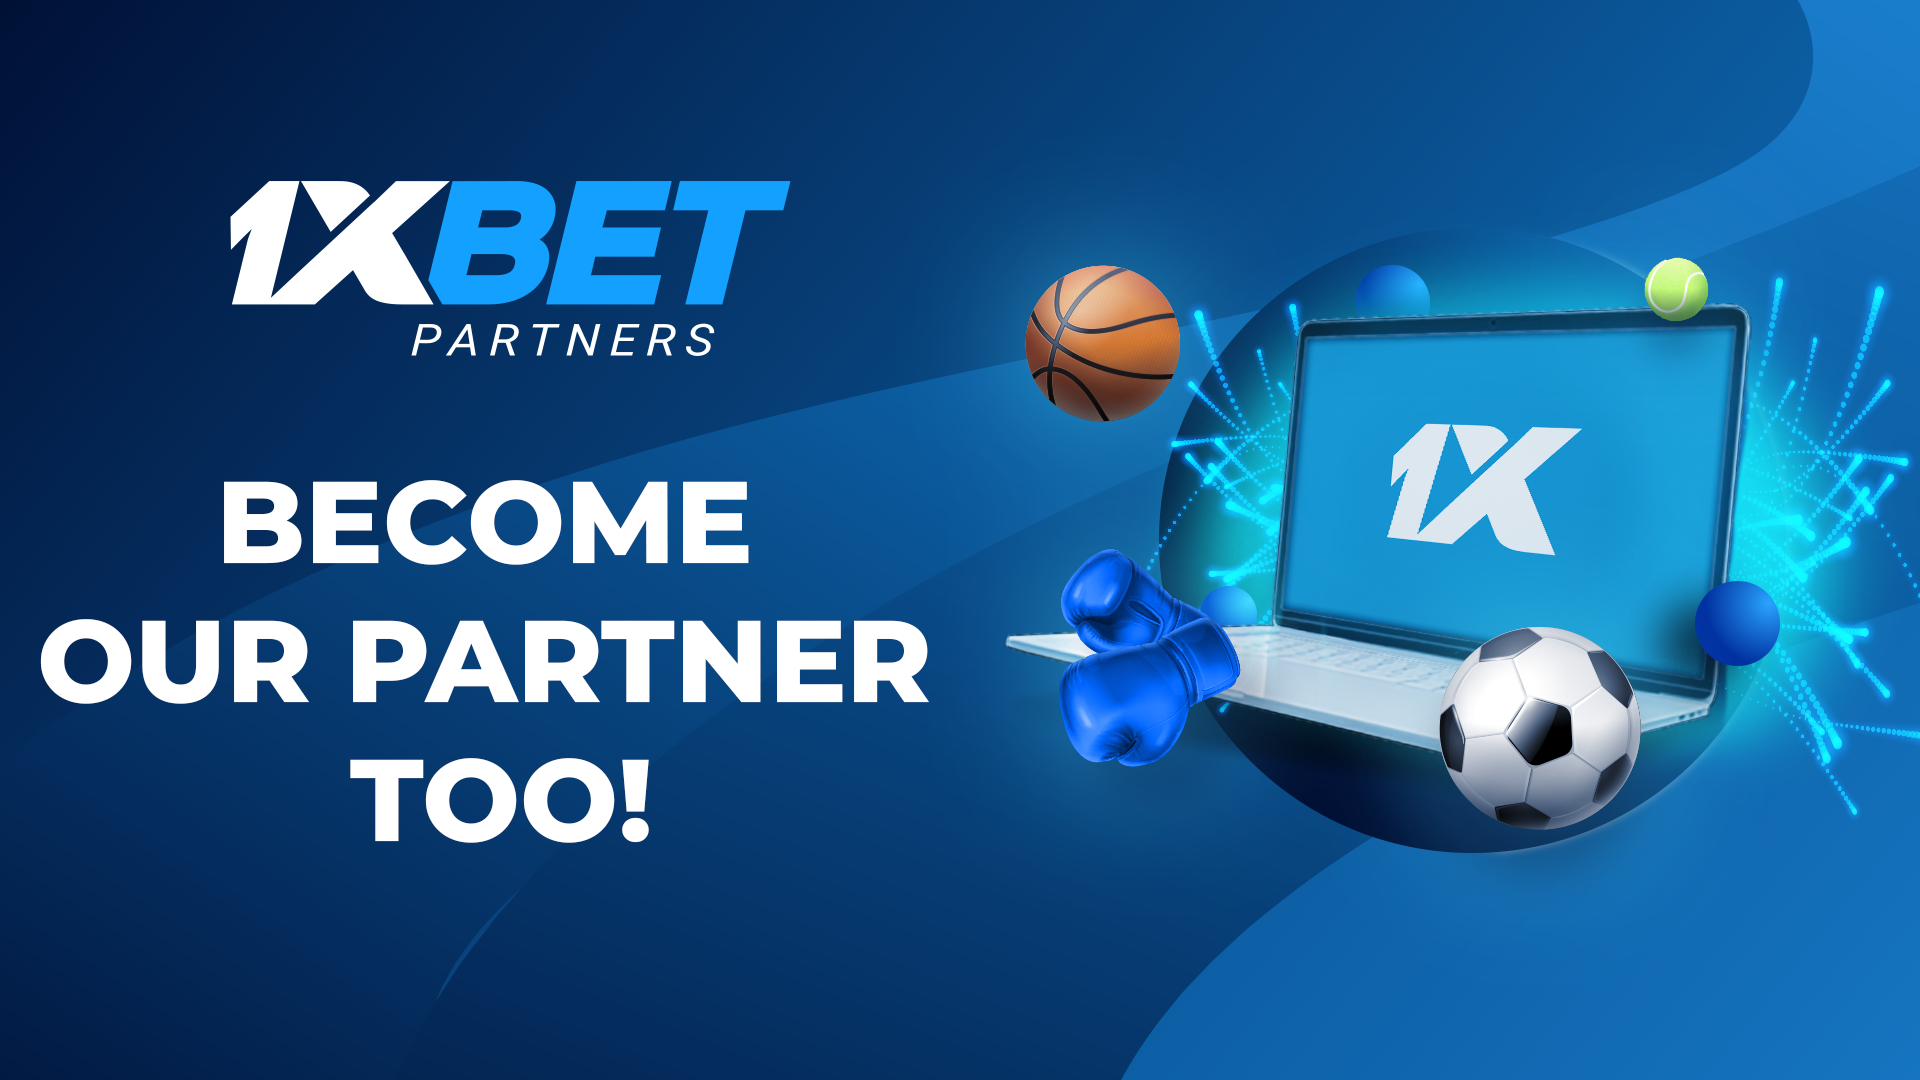 To Click Or Not To Click: 1xBet And Blogging